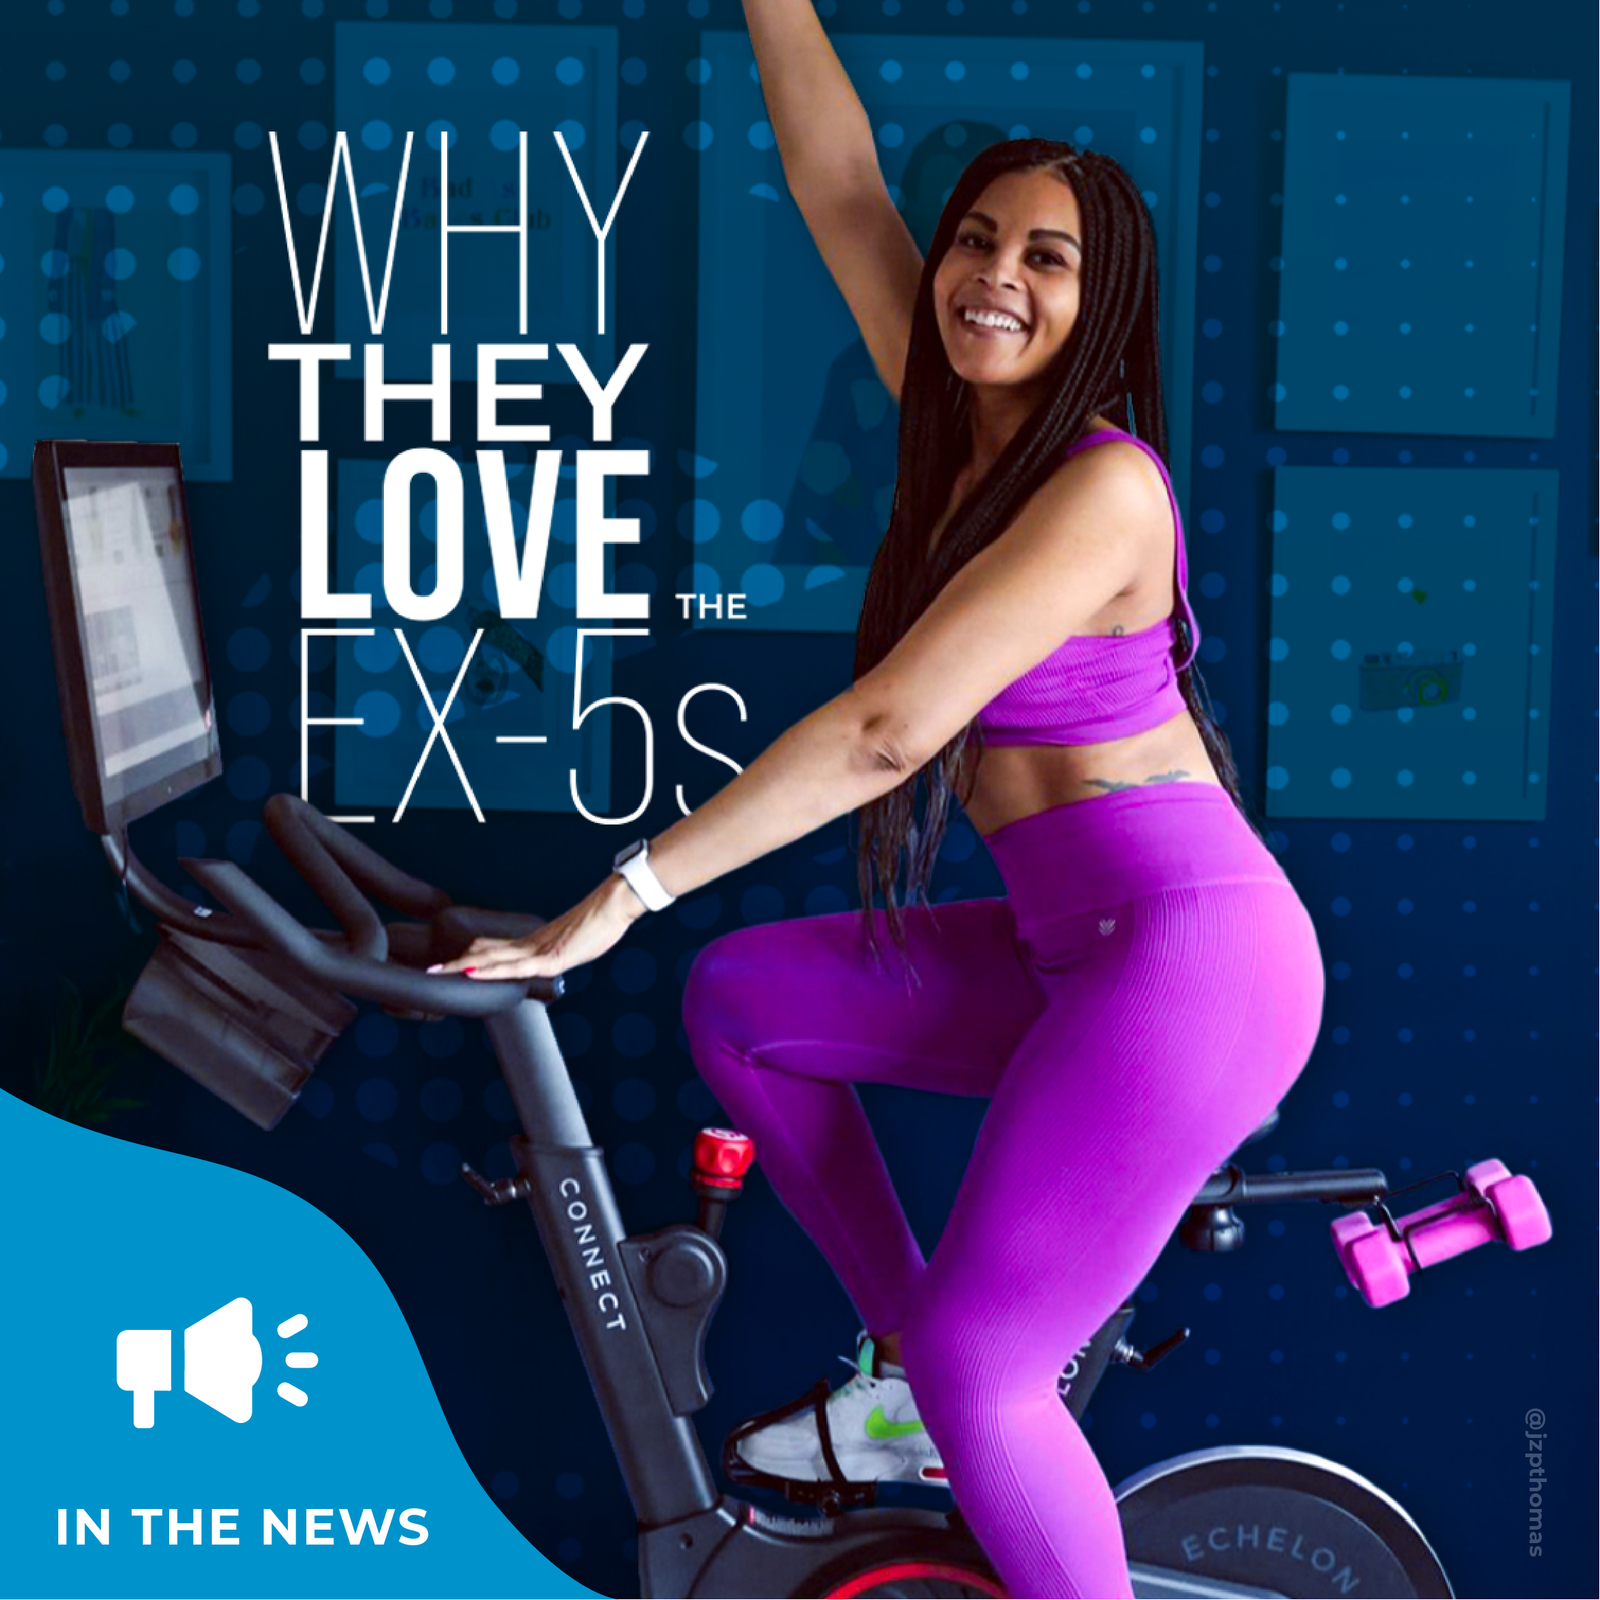 Woman in purple workout set with text "why they love the EX-5s"